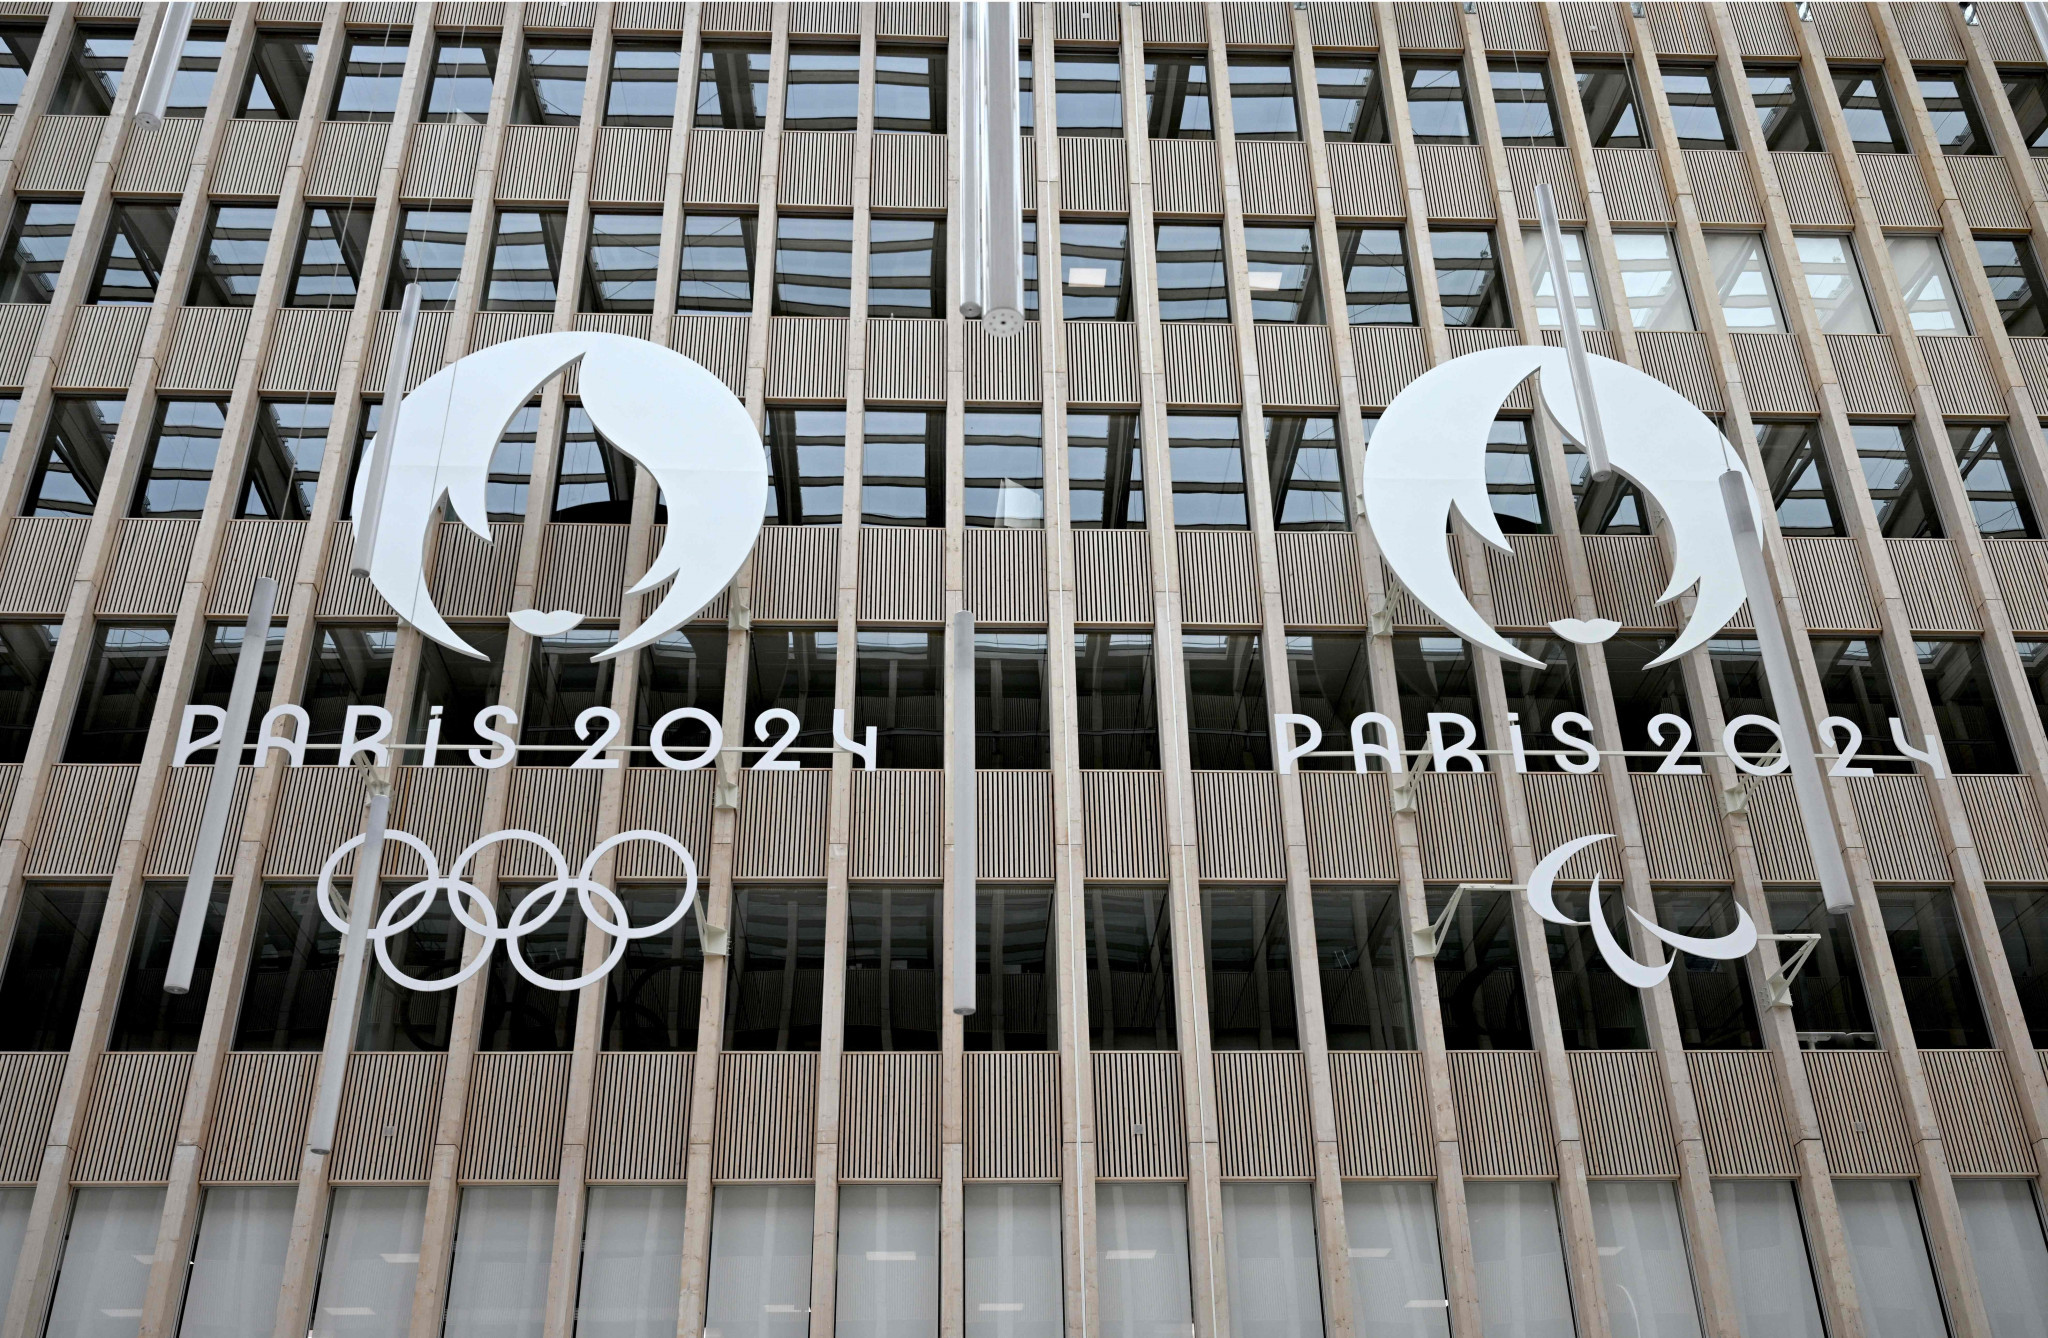 Paris 2024 set to dip into reserves in build-up to Olympics as budget to be scrutinised